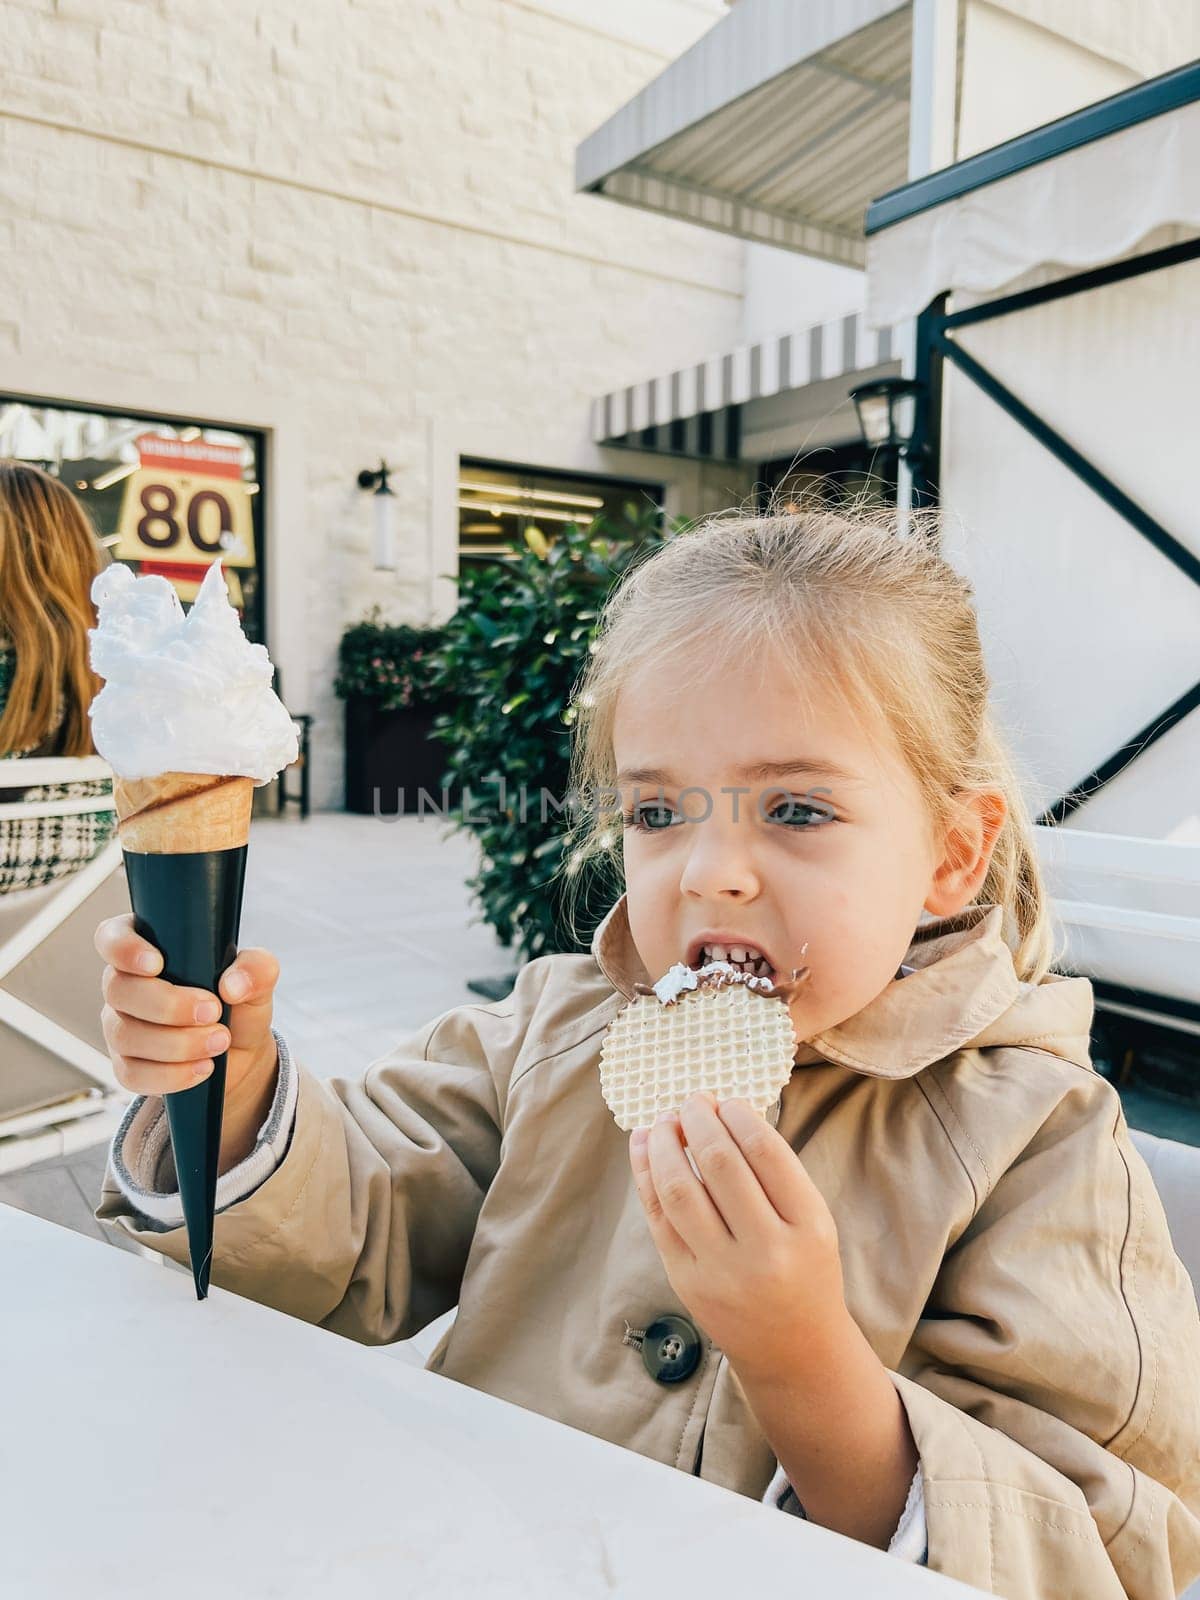 Little girl eats a waffle from an ice cream cone while sitting at the table. High quality photo